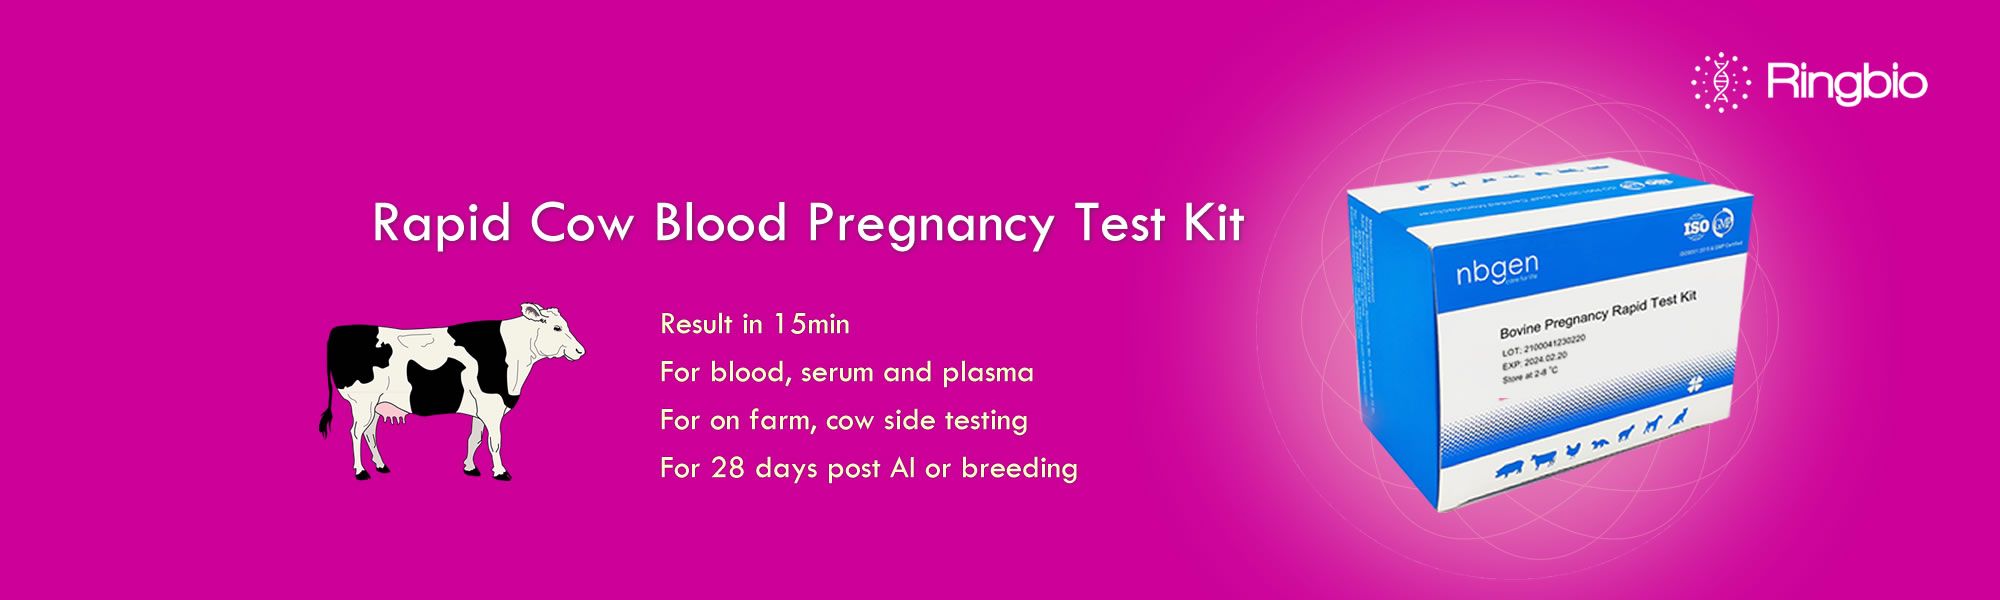 The whole blood rapid cow pregnancy test kit for on farm and cow side testing